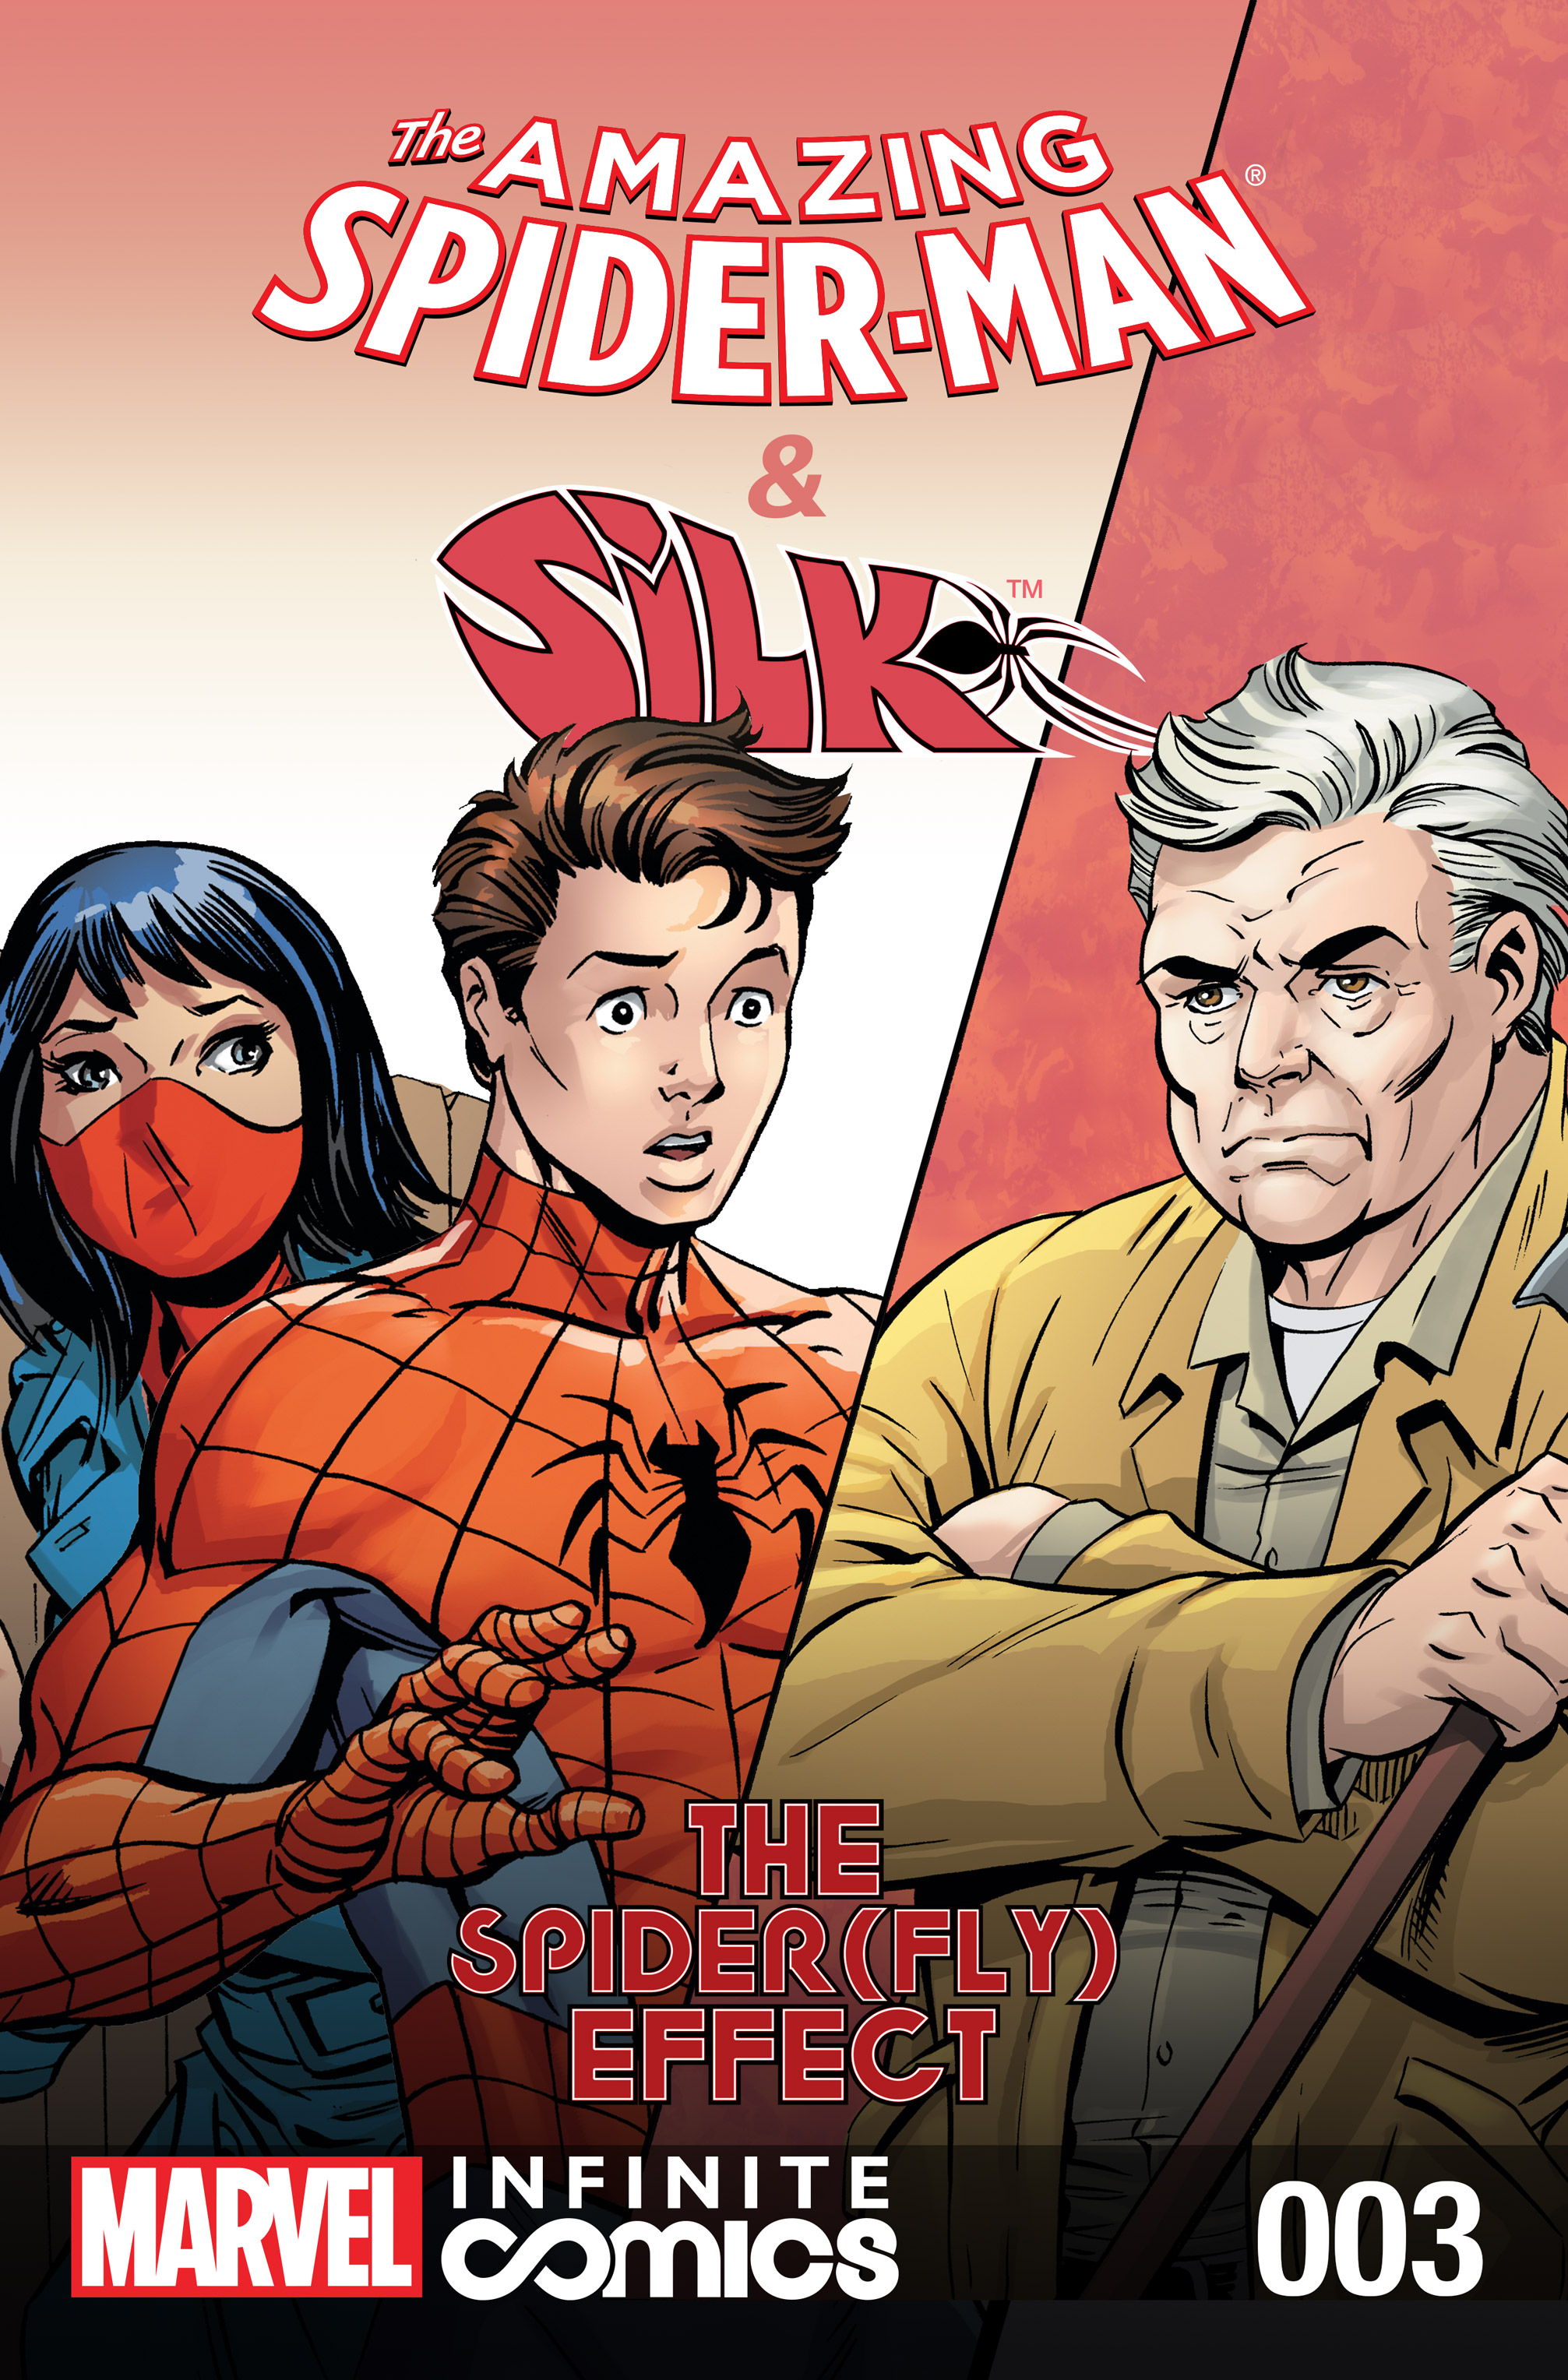 Read online The Amazing Spider-Man & Silk: The Spider(fly) Effect (Infinite Comics) comic -  Issue #3 - 1